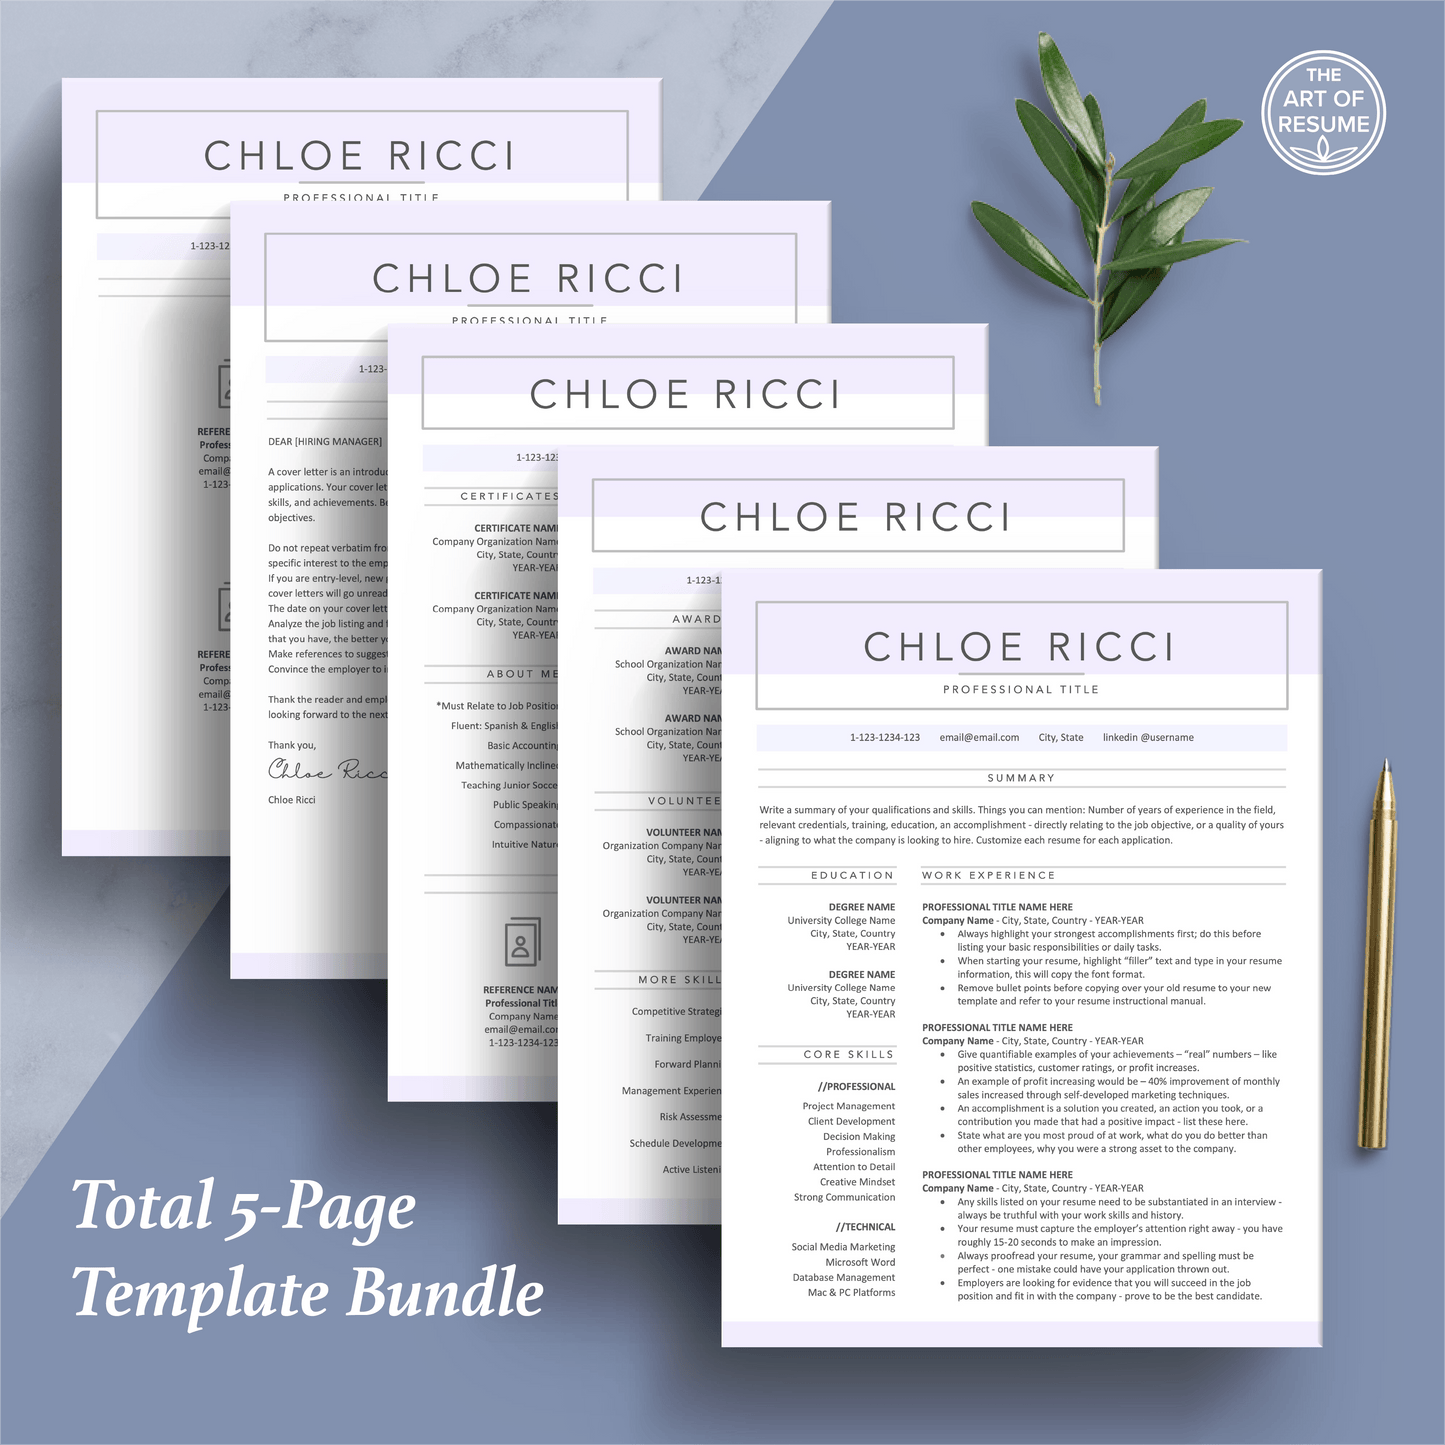 The Art of Resume Templates | Professional Simple Pink Blue Resume CV Design Bundle including matching cover letter and reference page